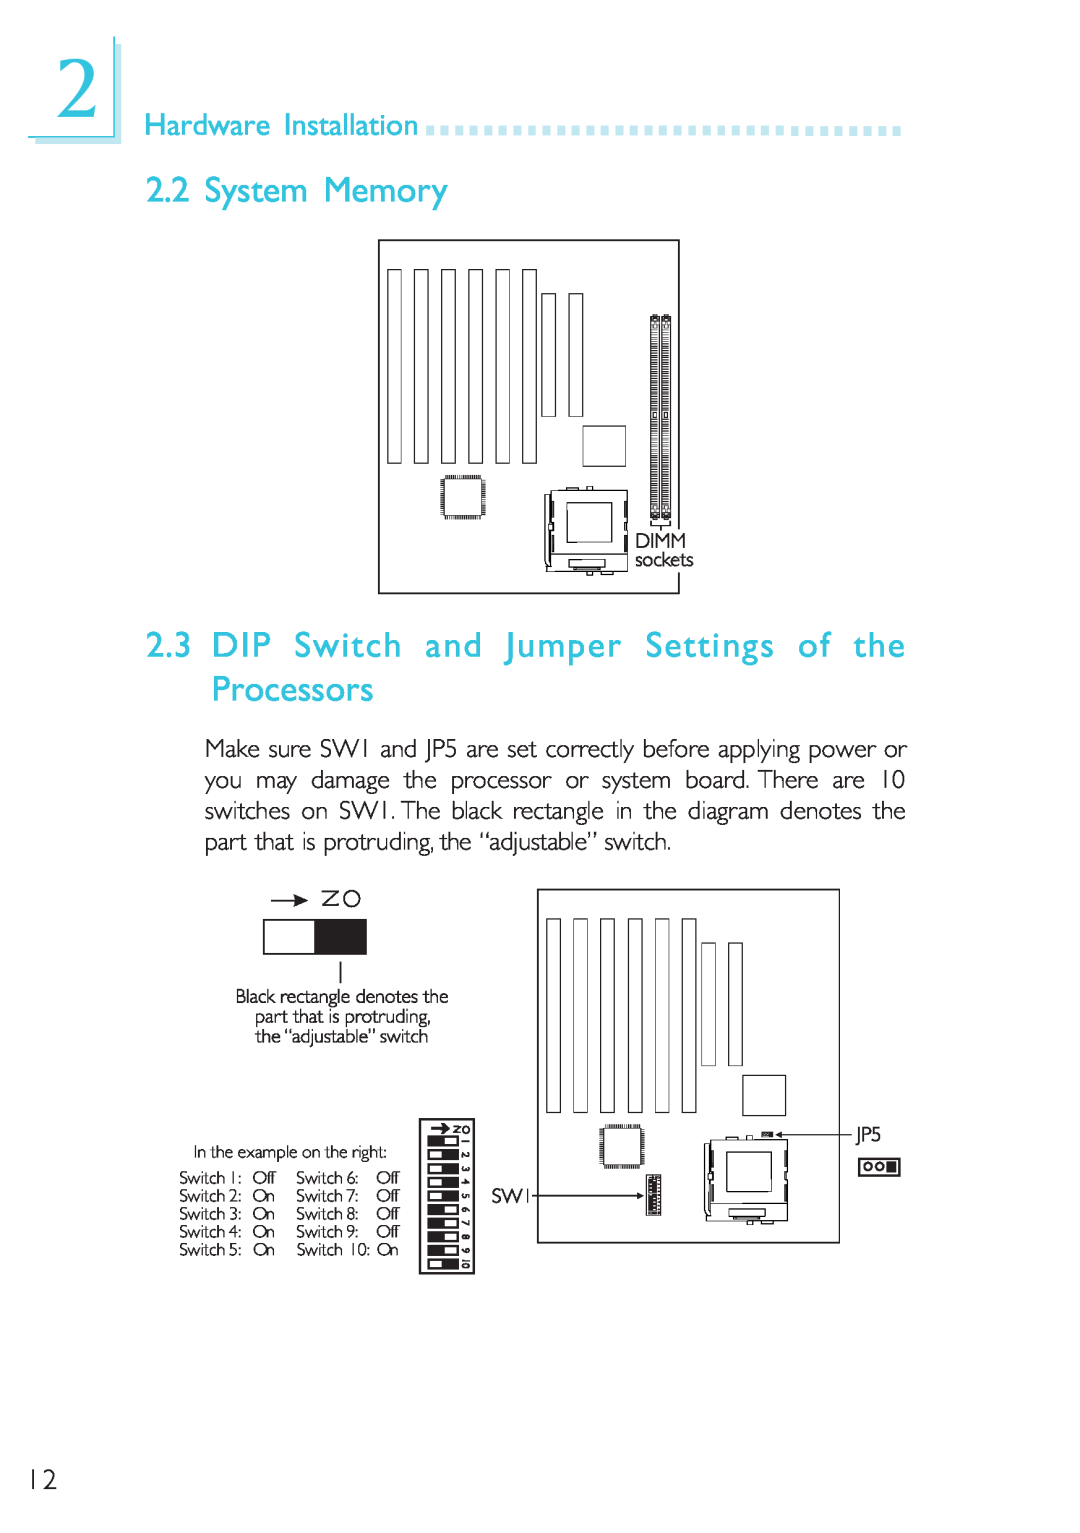 Microsoft G7VP2 manual System Memory, DIP Switch and Jumper Settings of the Processors, Hardware Installation 